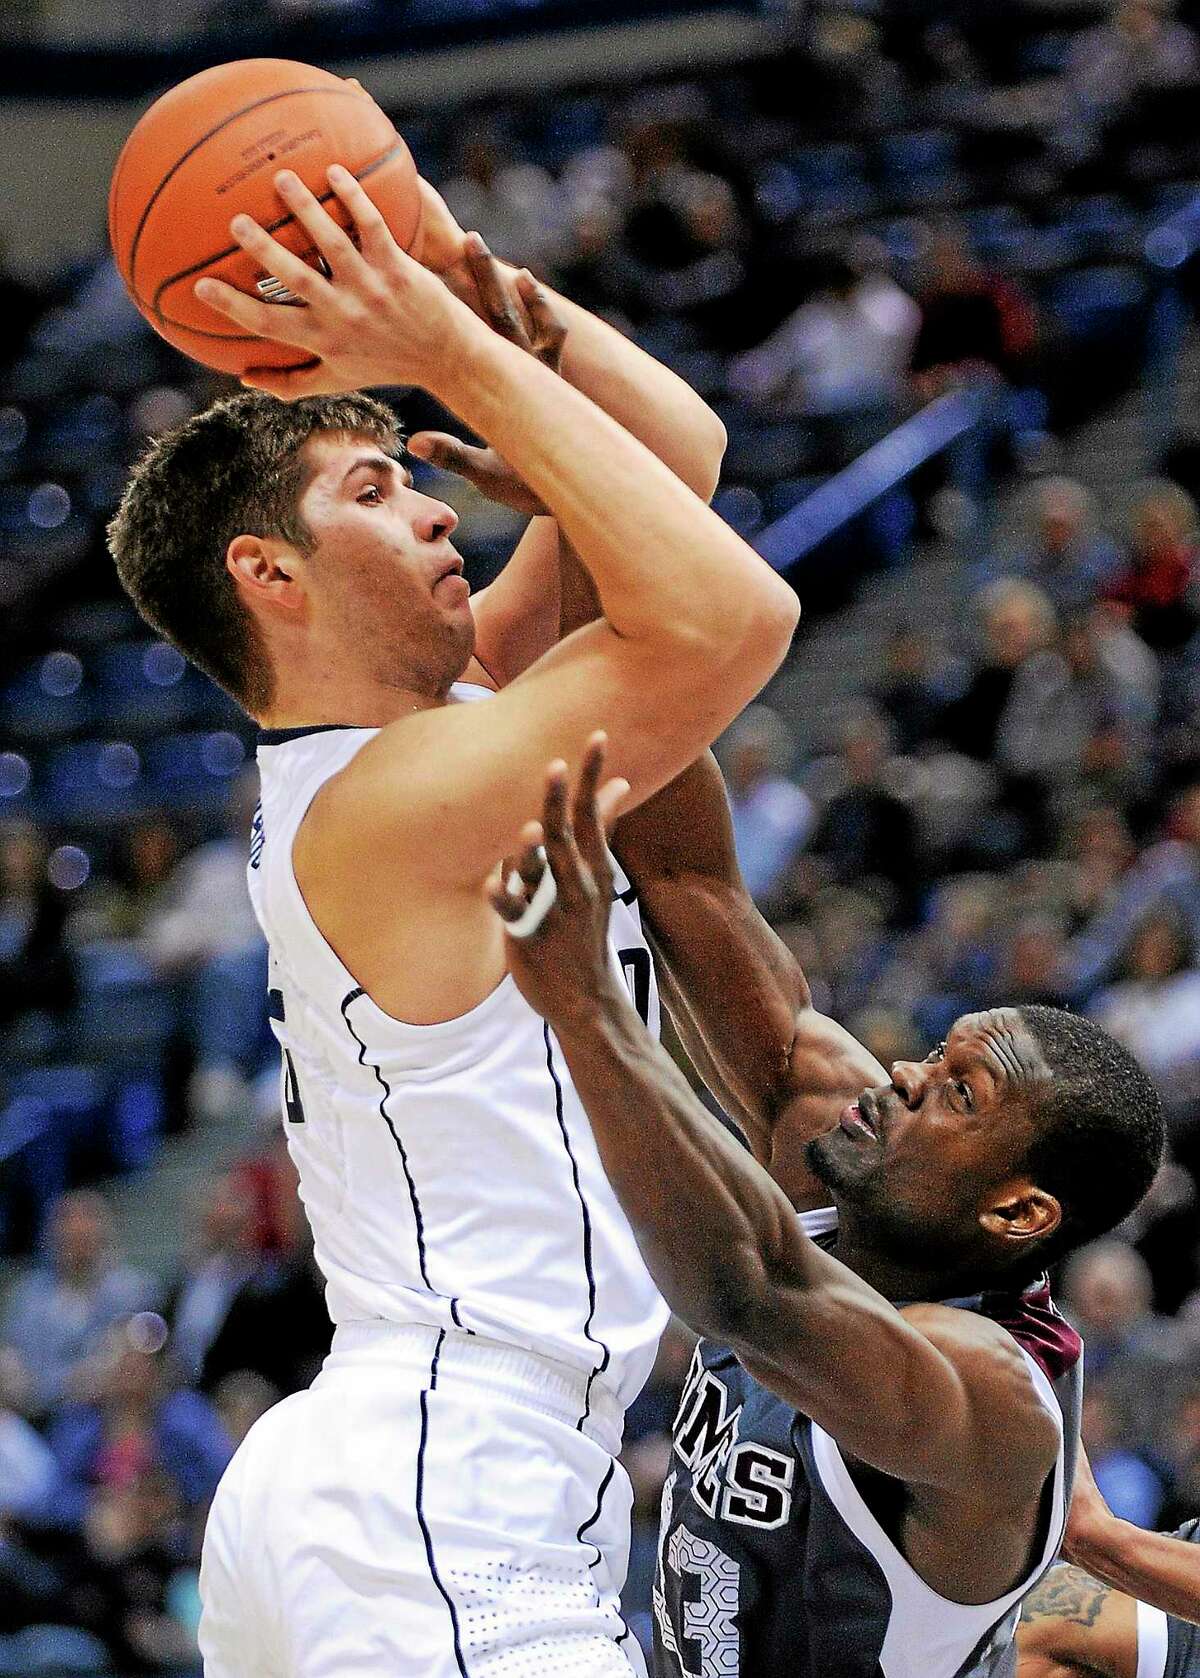 Leon Tolksdorf, left, has decided to transfer from UConn to American University.